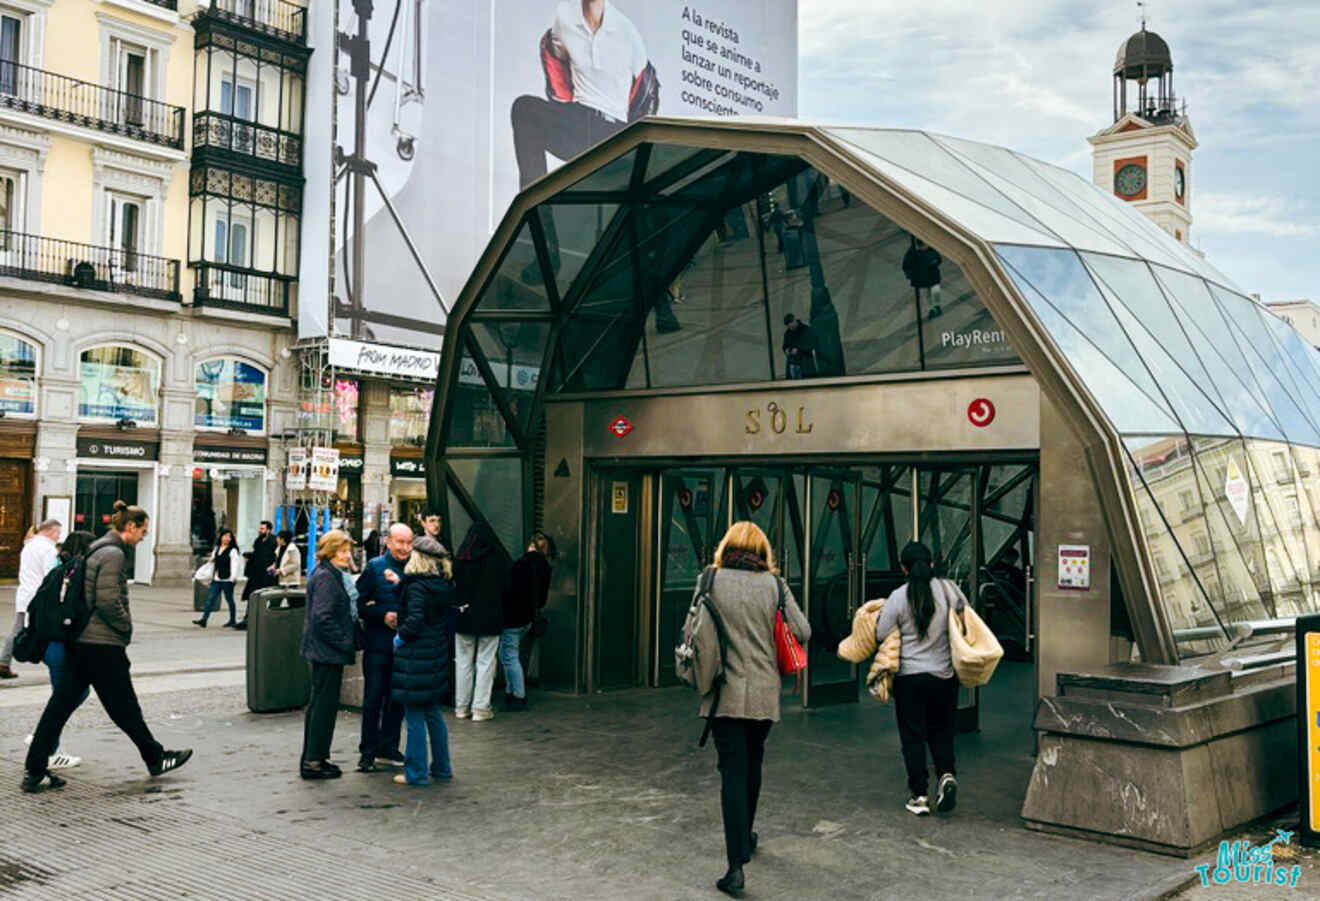 Pedestrians entering and exiting the modern glass-and-metal Sol metro station in Madrid, with the bustling city life around